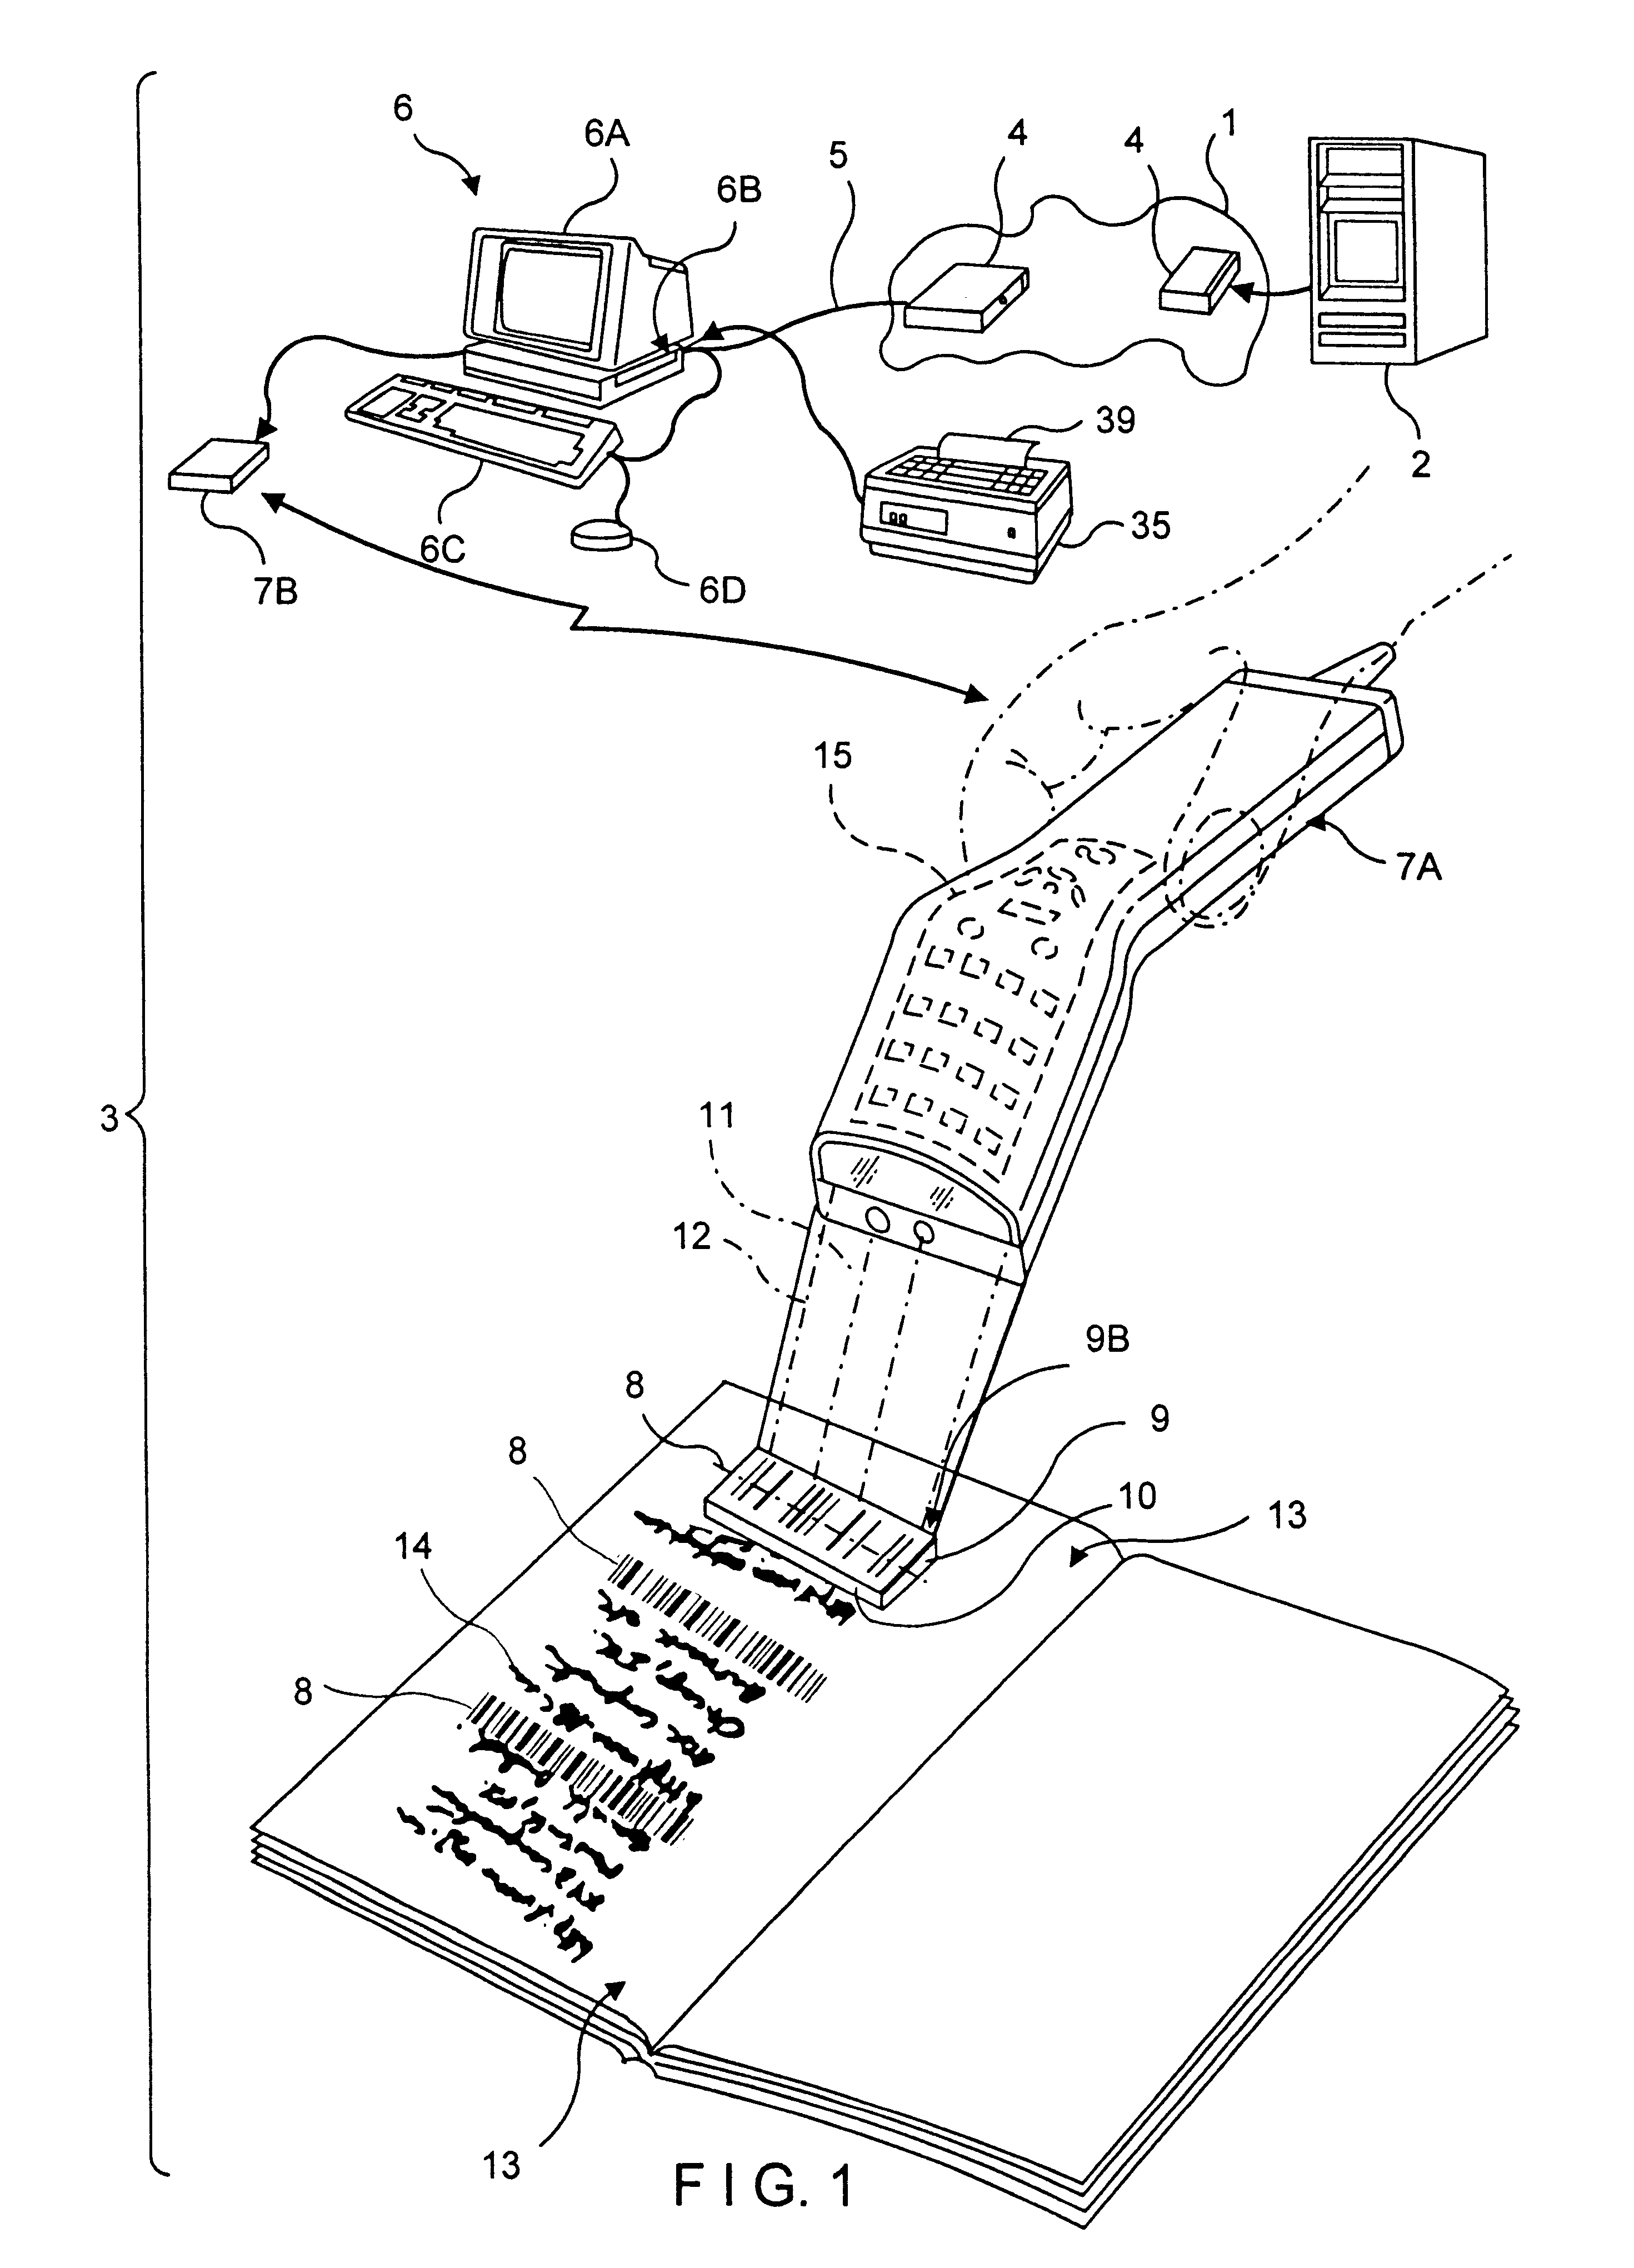 System and method for accessing internet-based information resources by scanning Java-Applet encoded bar code symbols